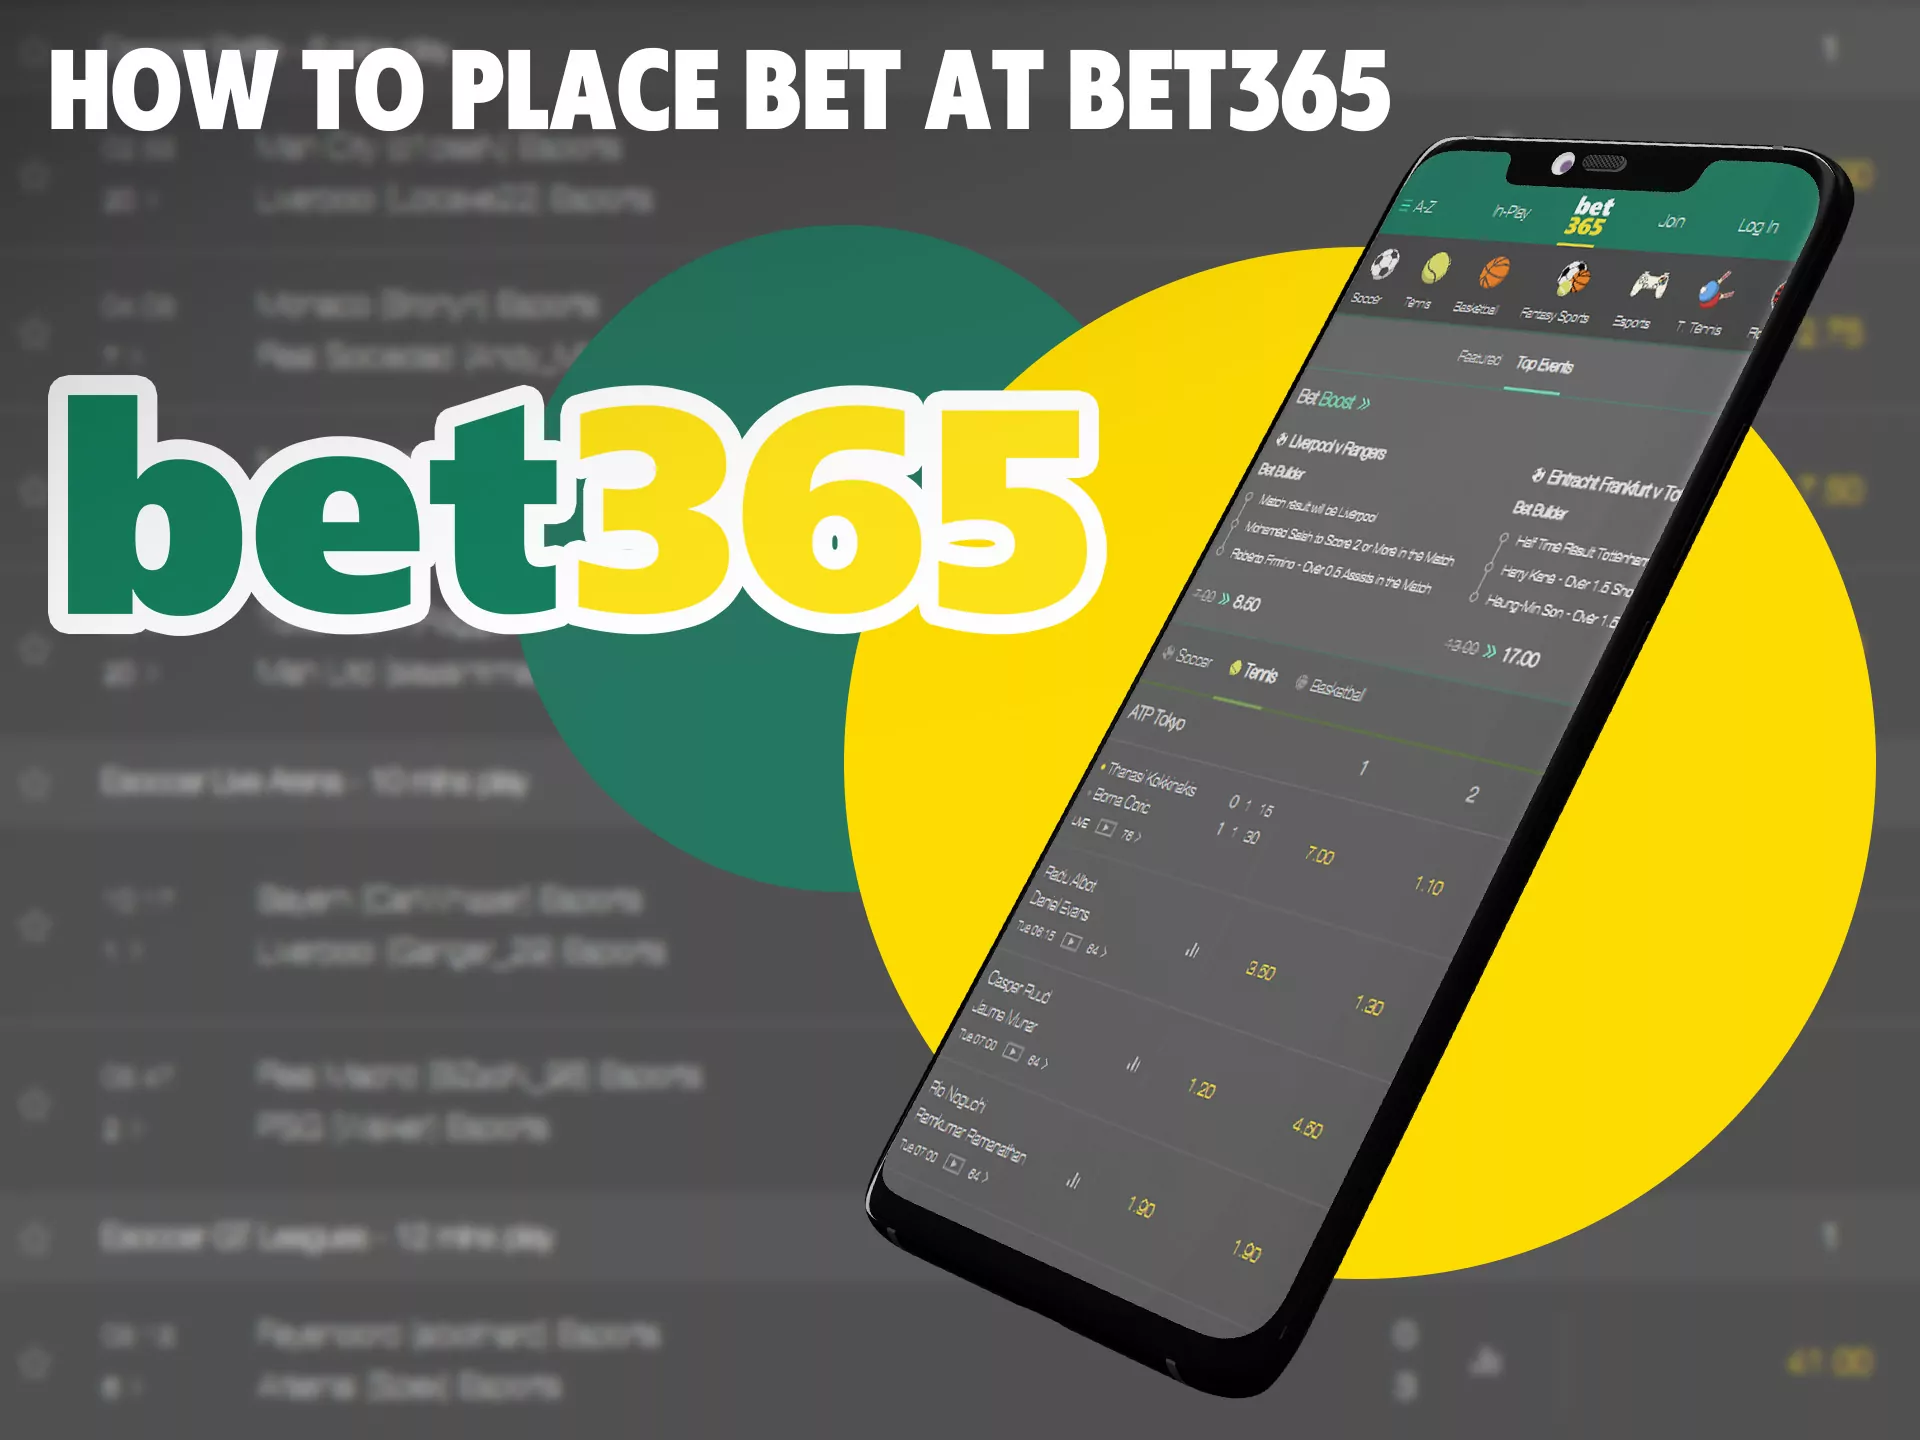 It's easy to place bet at Bet365.